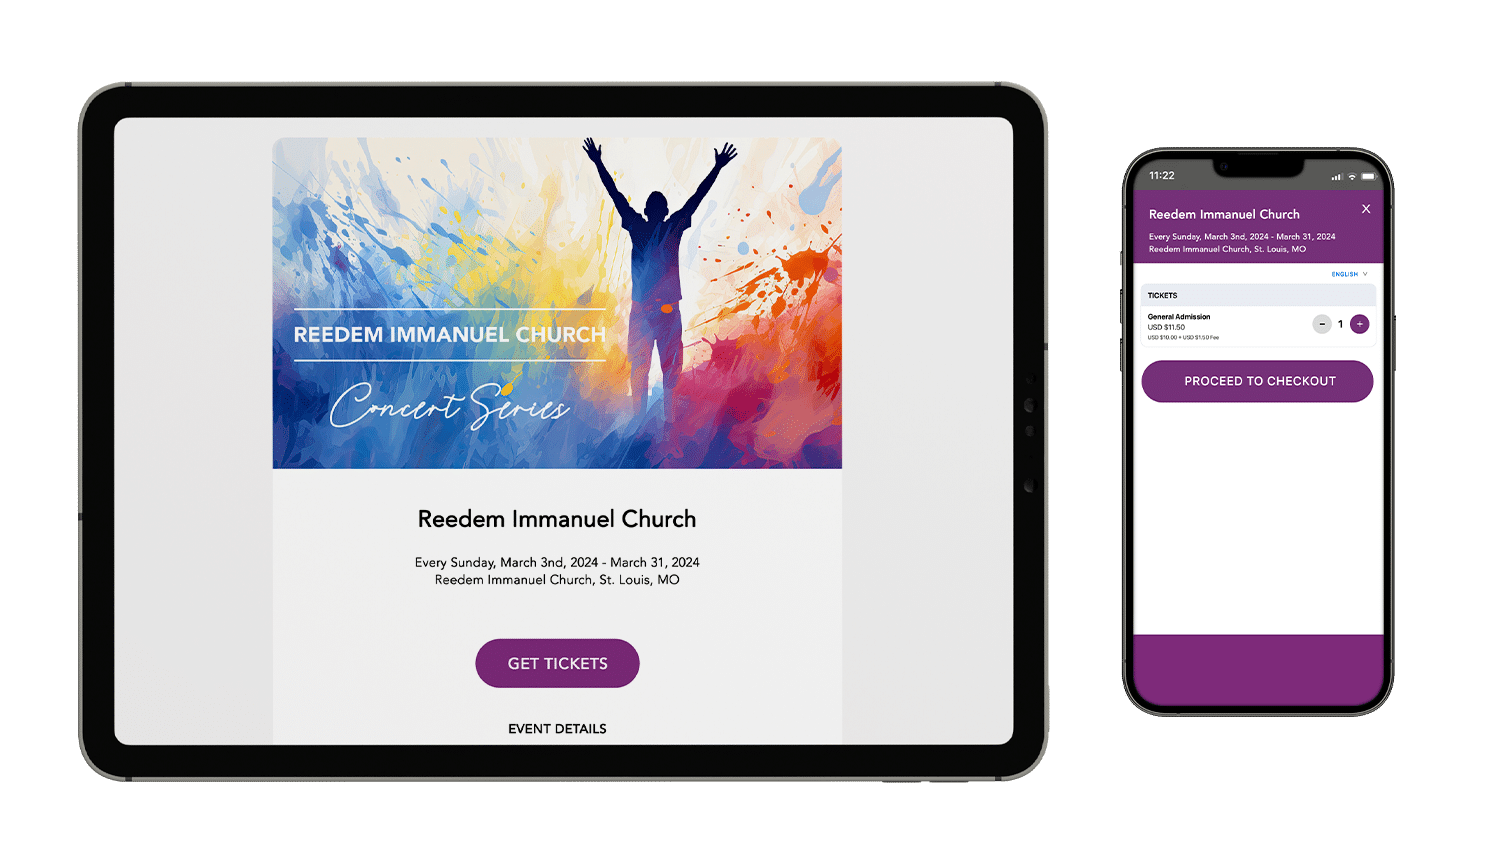 An event mockup of Reedem Immanuel Church on a tablet and mobile phone